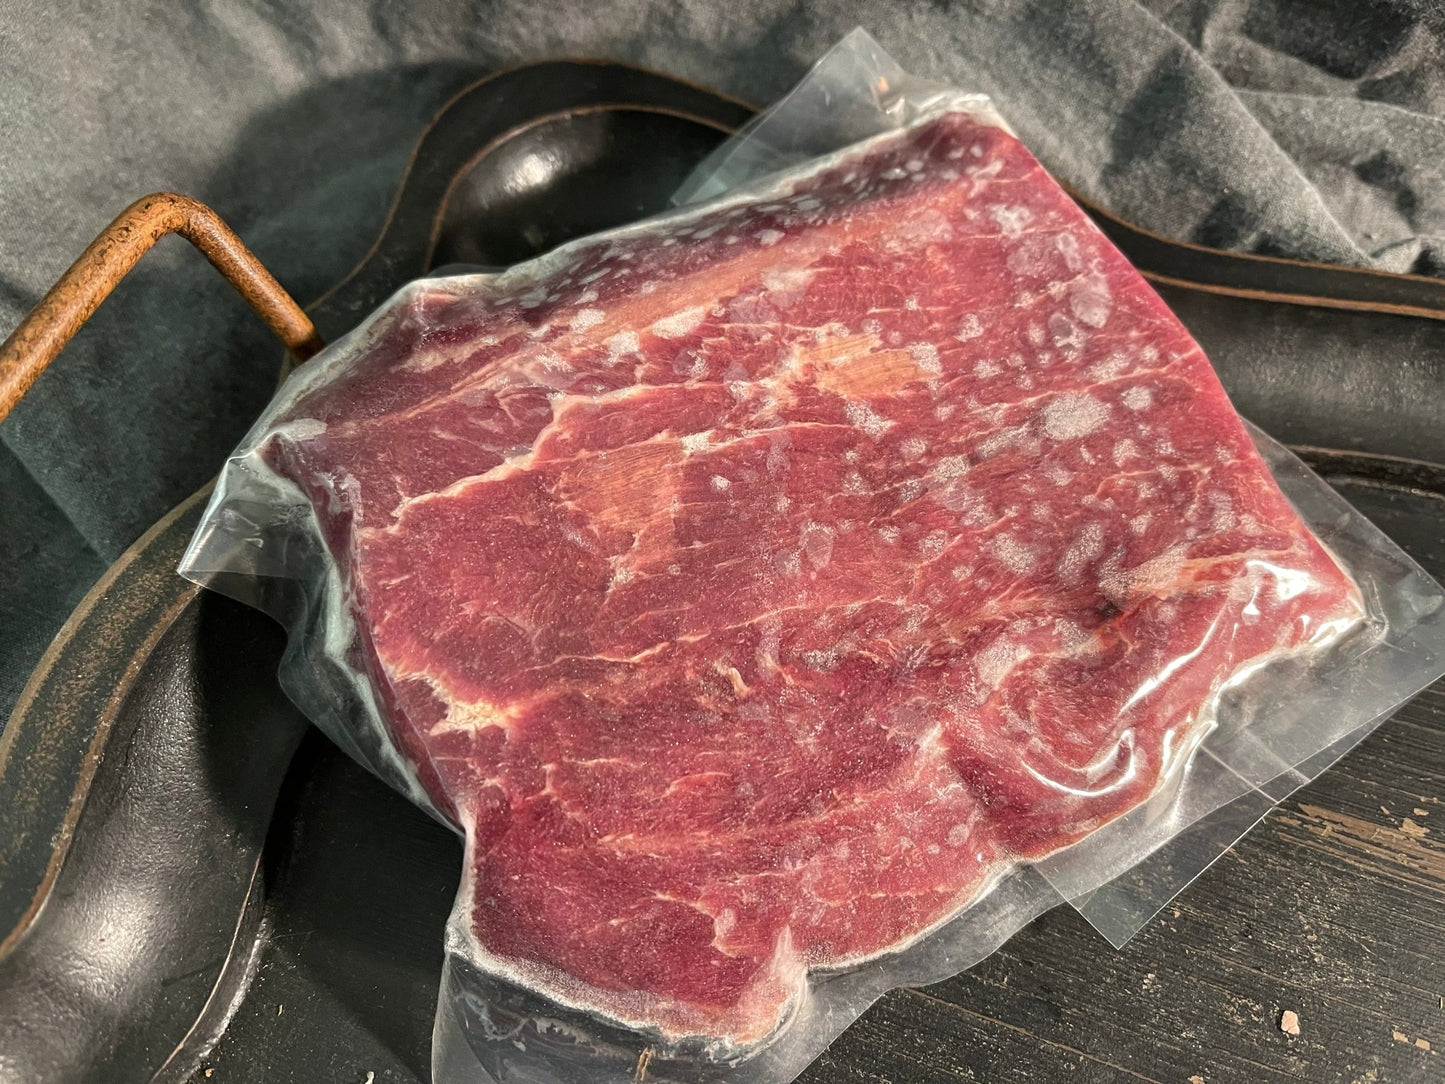 100% All-Natural Grass-Fed "Misfit" Flat Iron Steak - The Hufeisen-Ranch (WYO Wagyu)